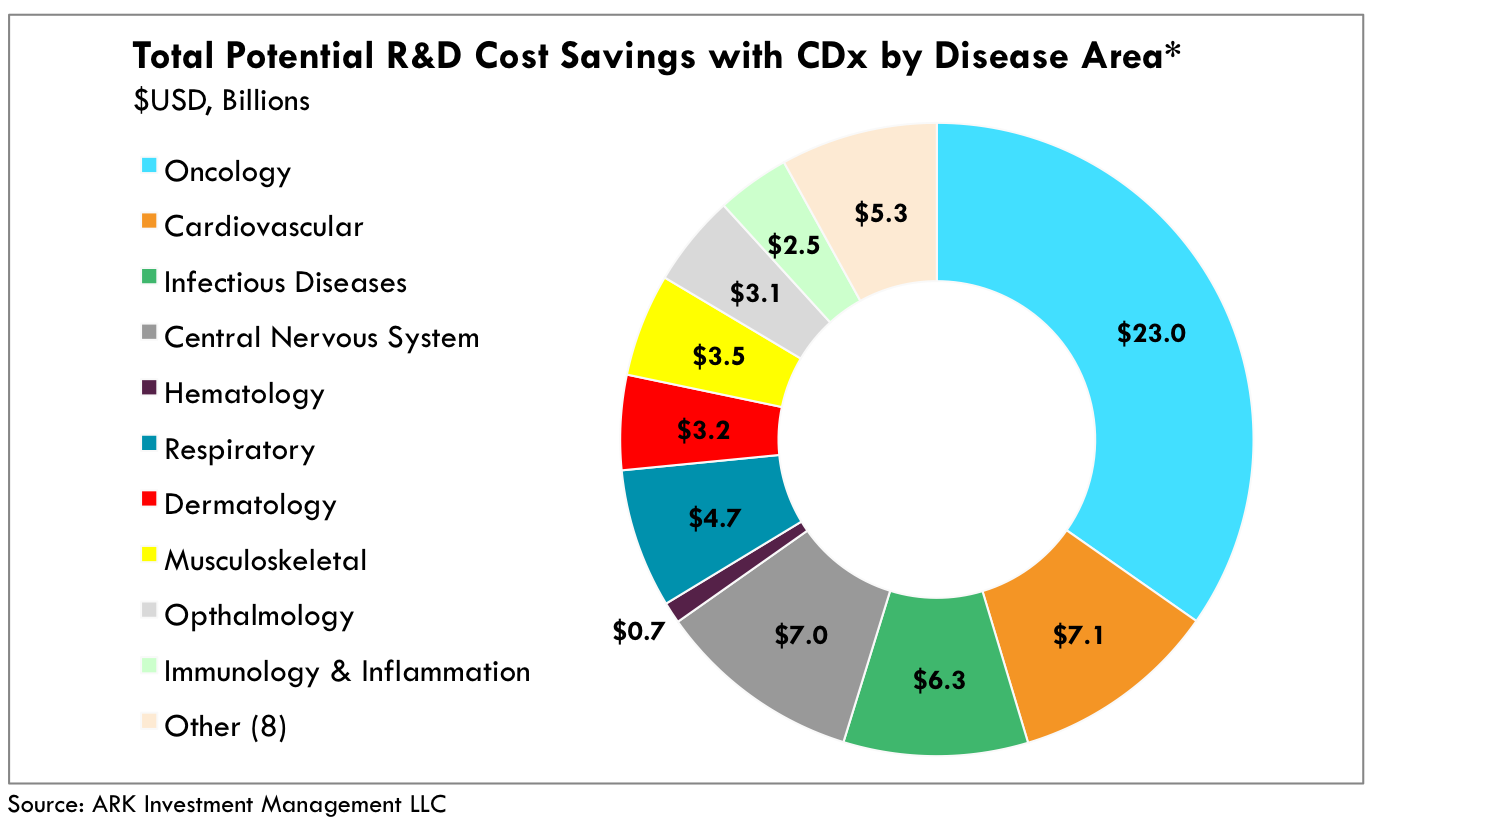 R&D Costs, Companion Diagnostics, cdx, drug approval process, health care, diagnostics, ark research, healthcare innovation, invest in healthcare, ark invest 